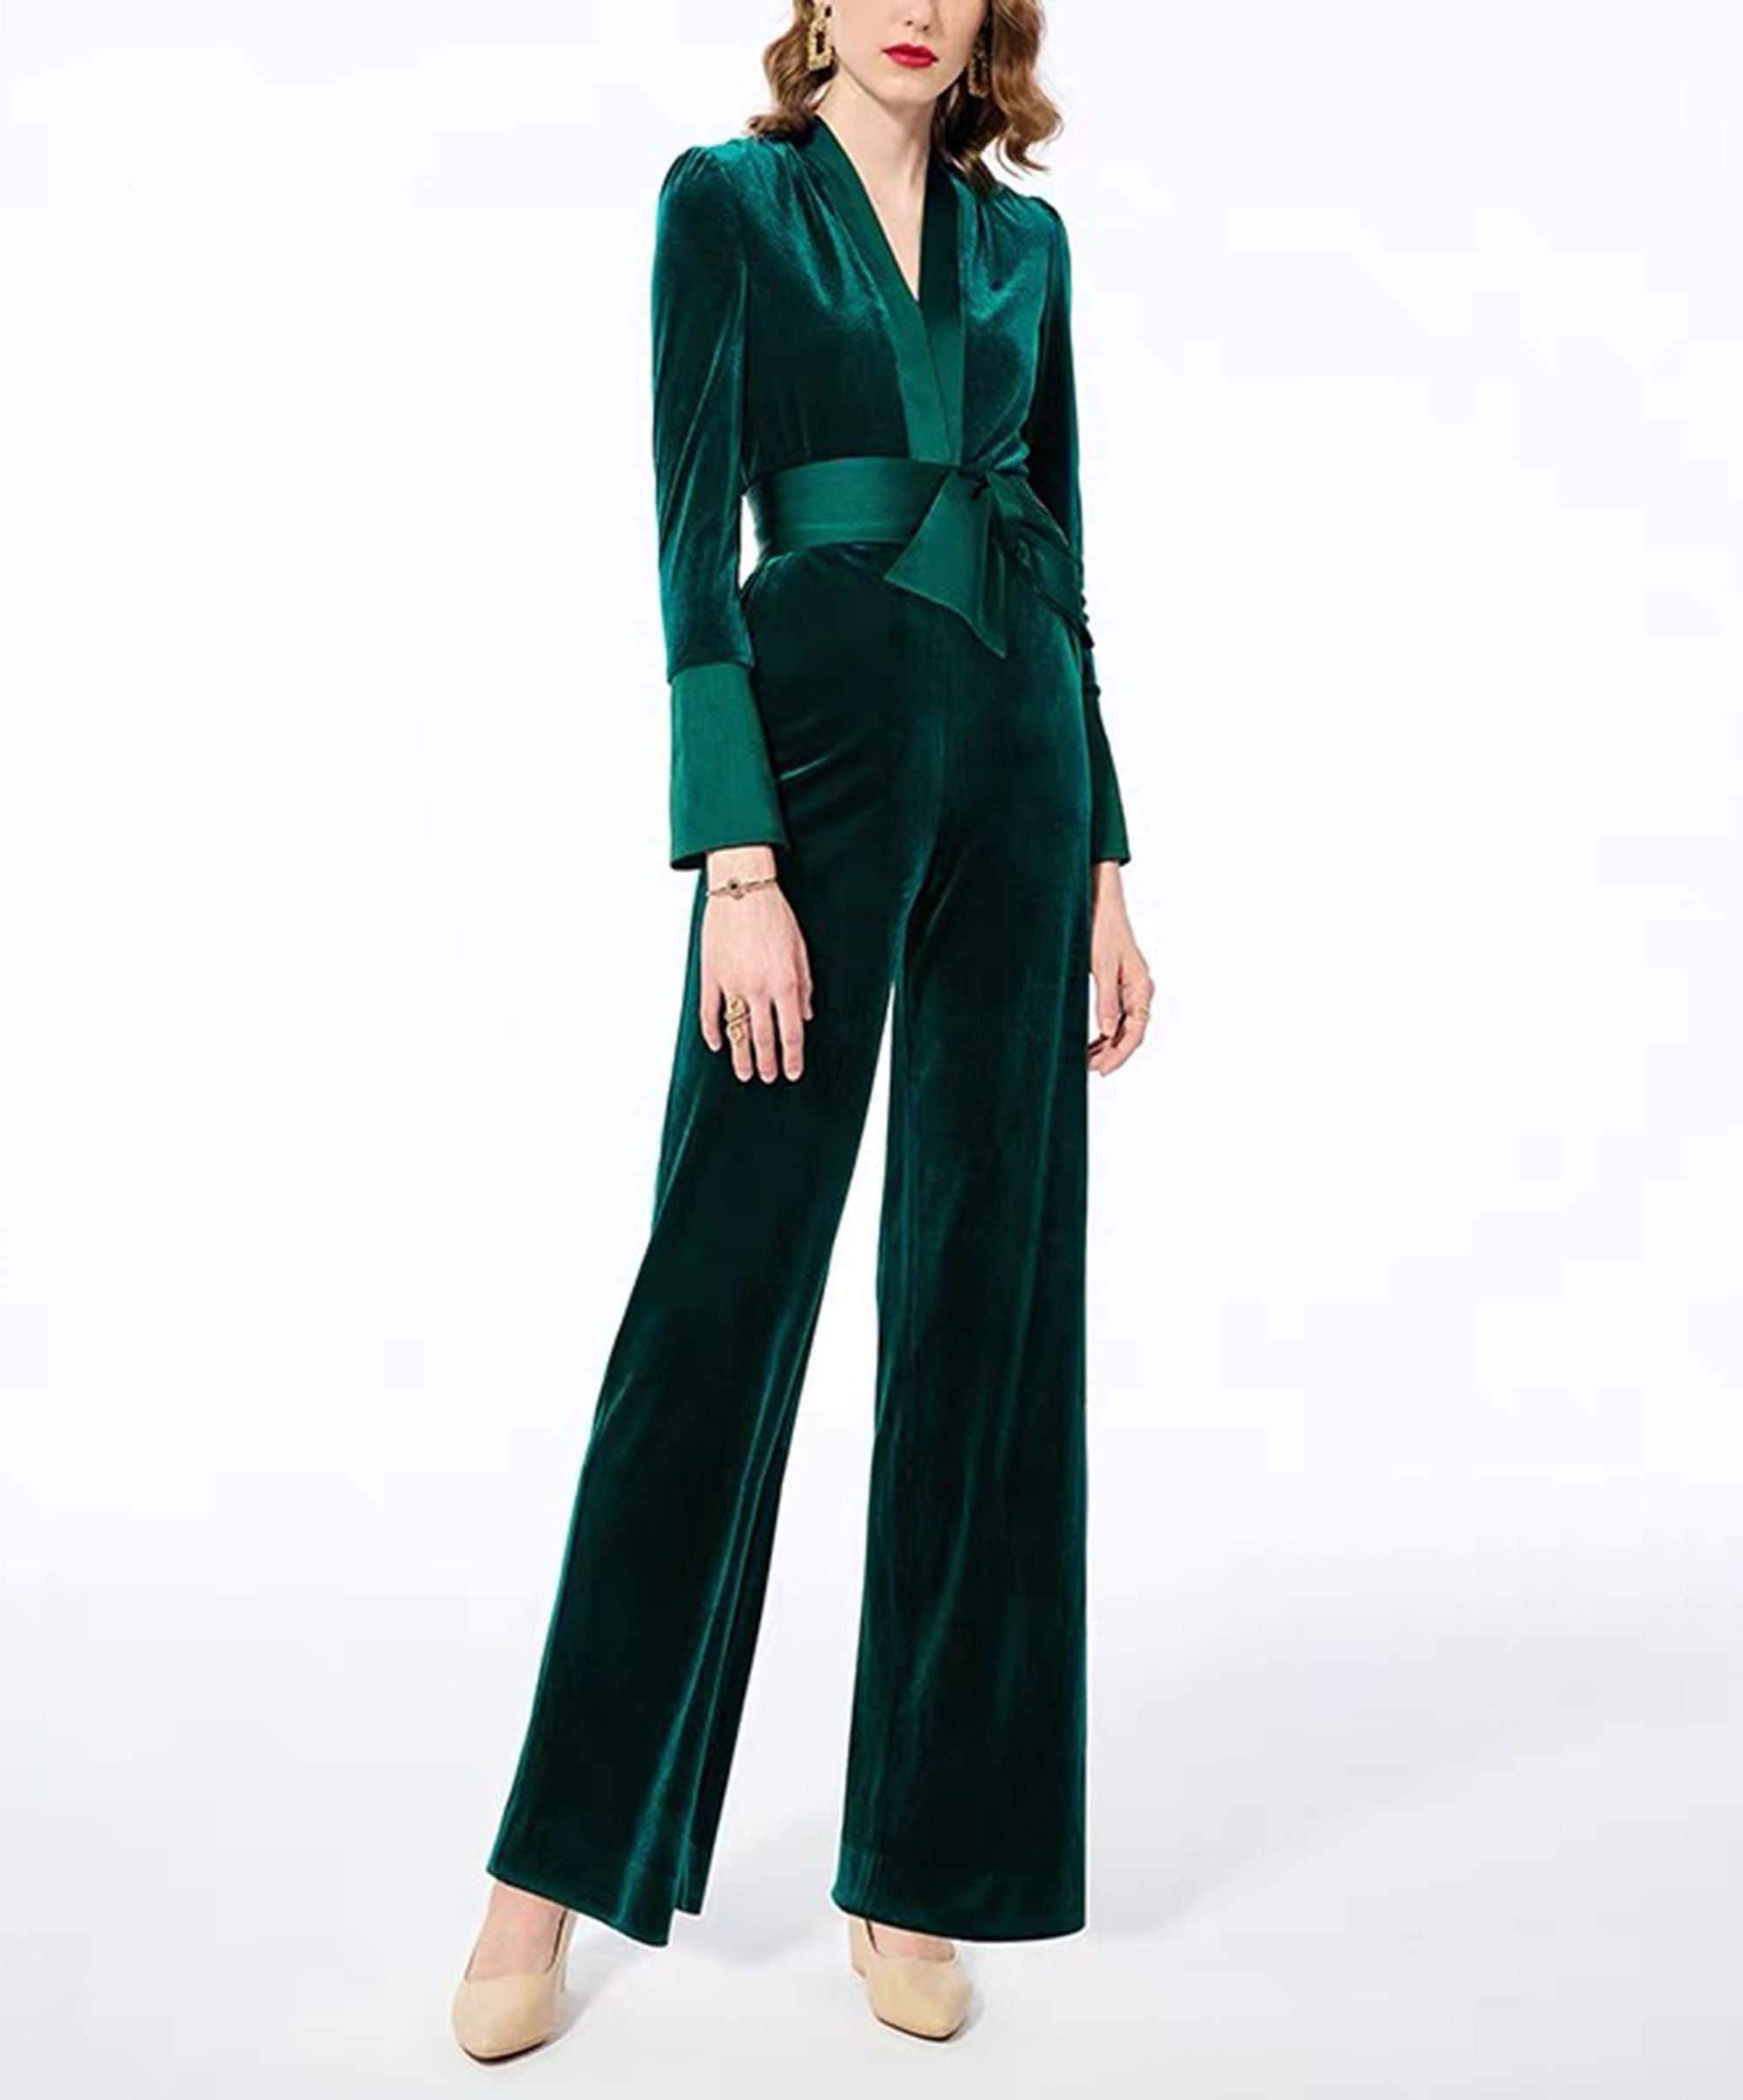 Body On Me Luxe Emerald Green Sequin Sheer Bodysuit Midi Dress – Nazz  Collection